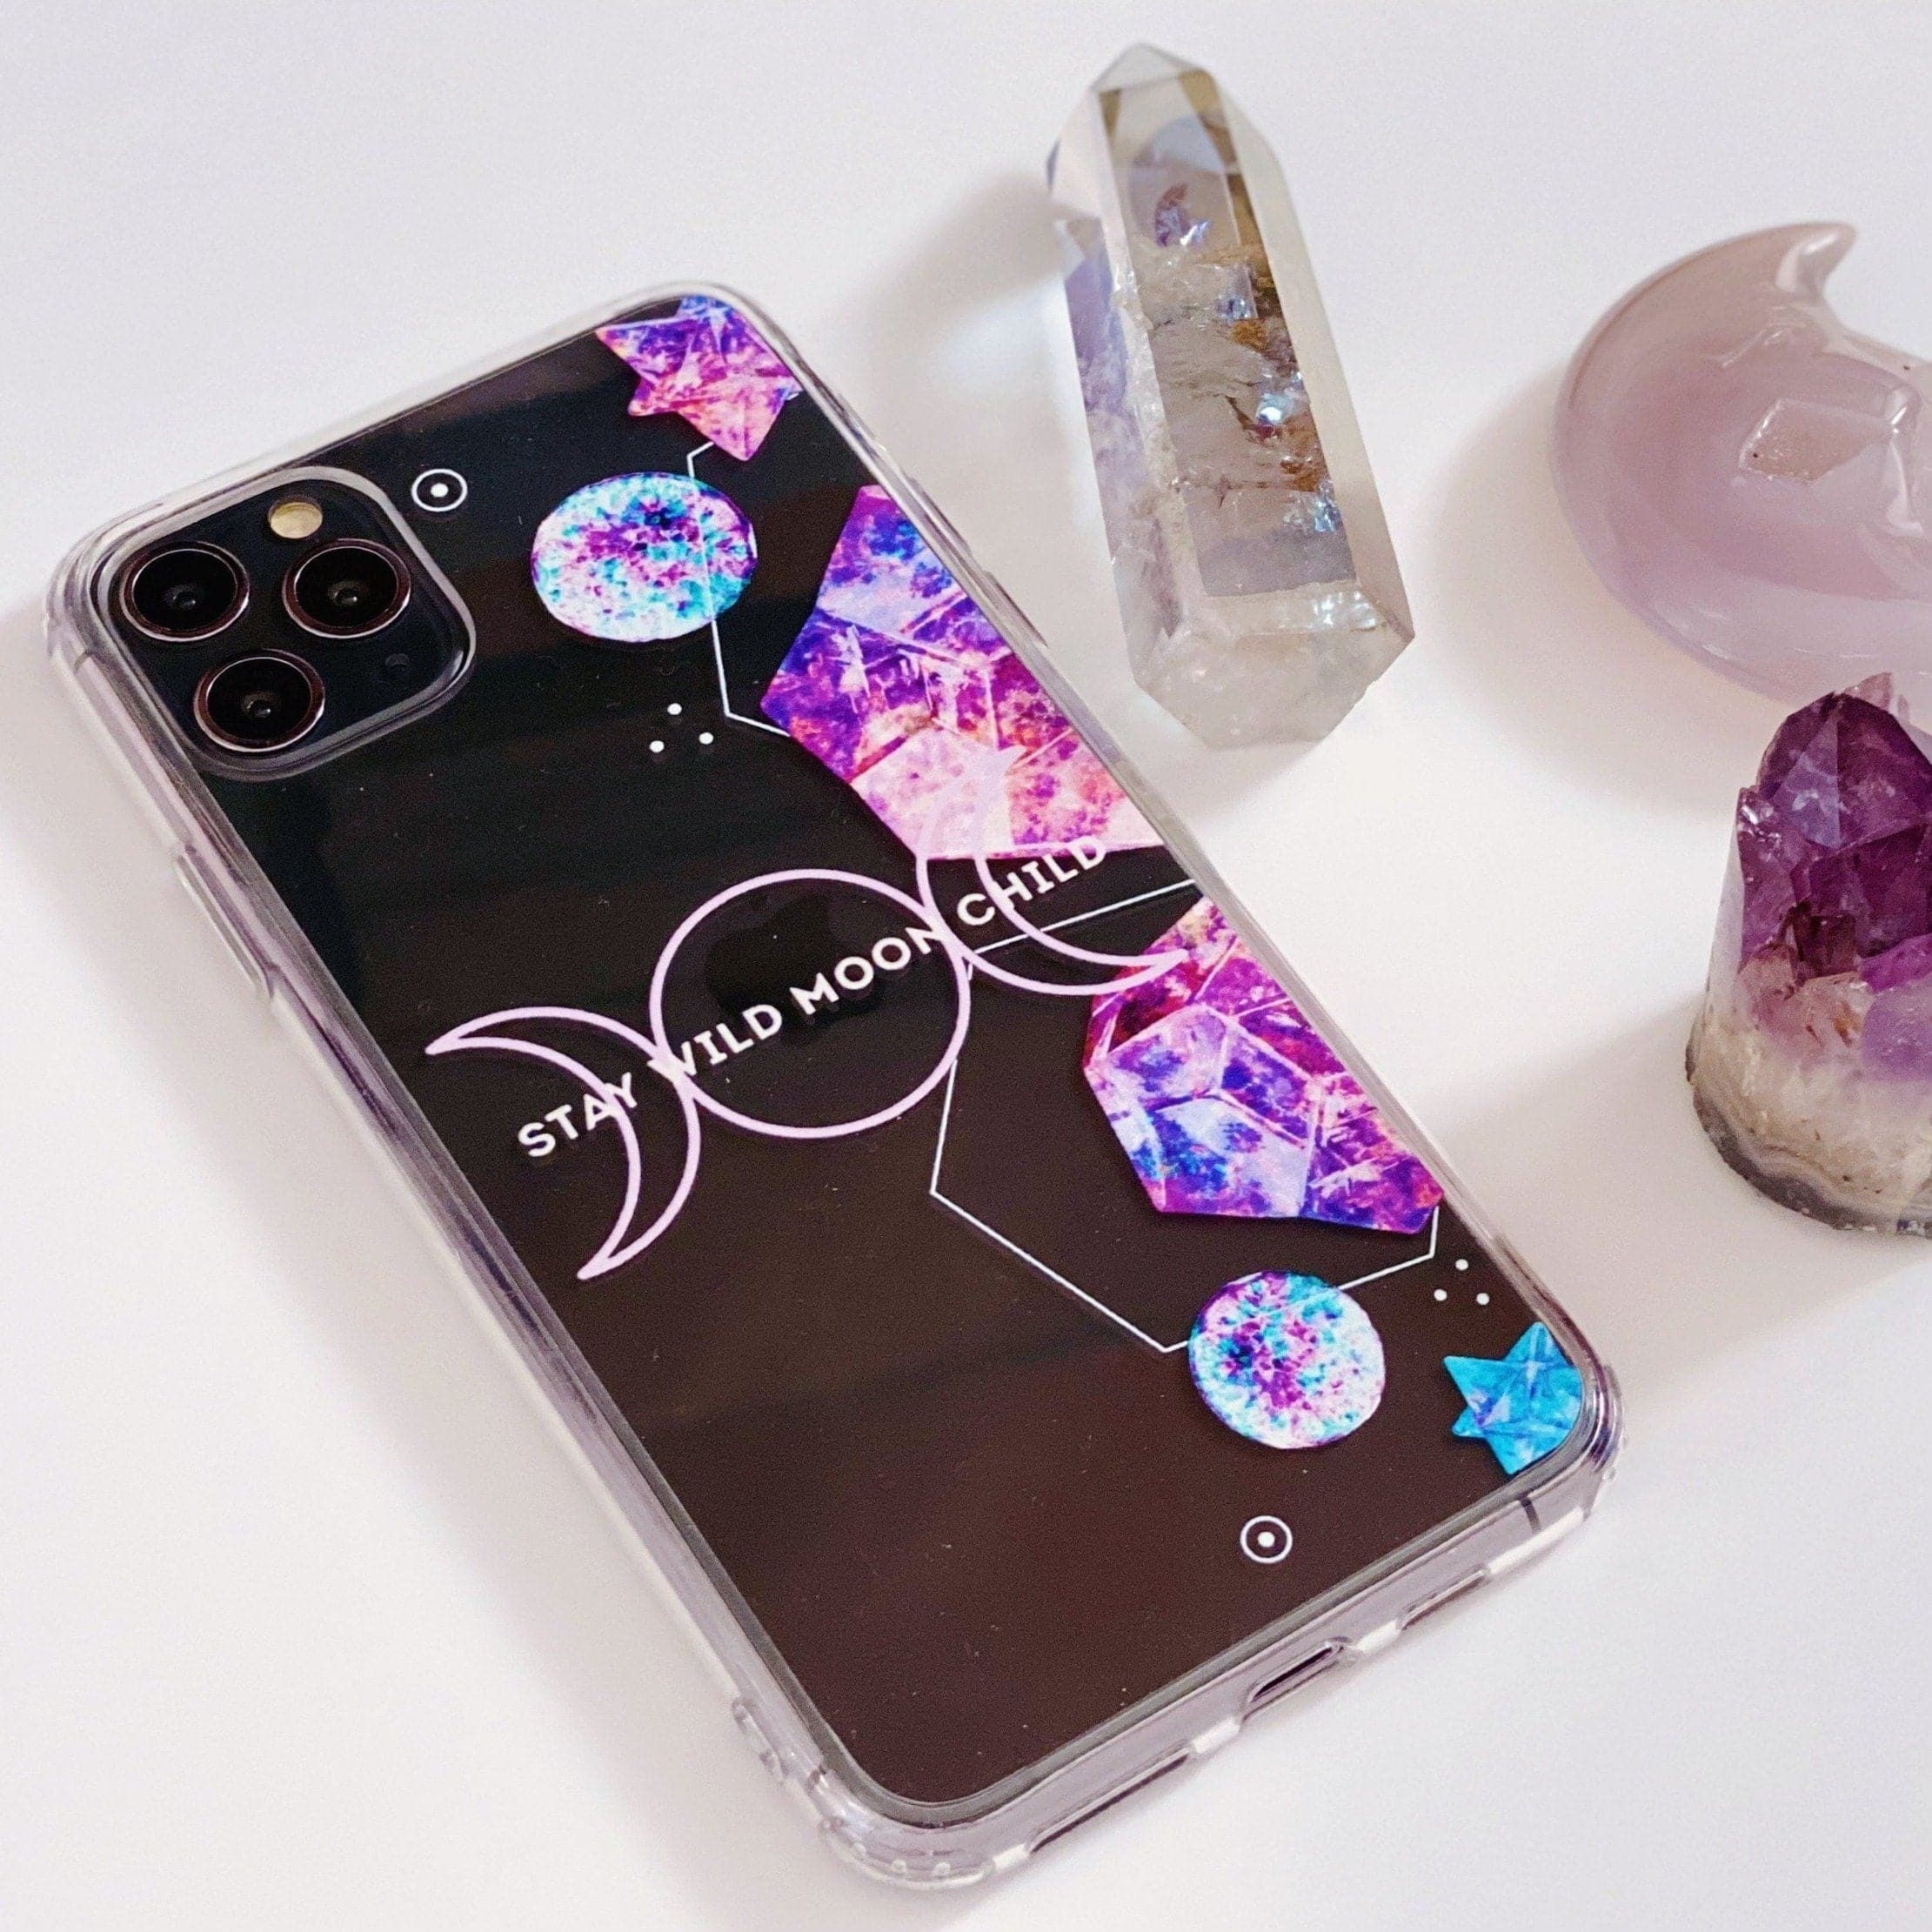 Stay Wild Moon Child Crystals Clear Phone Case